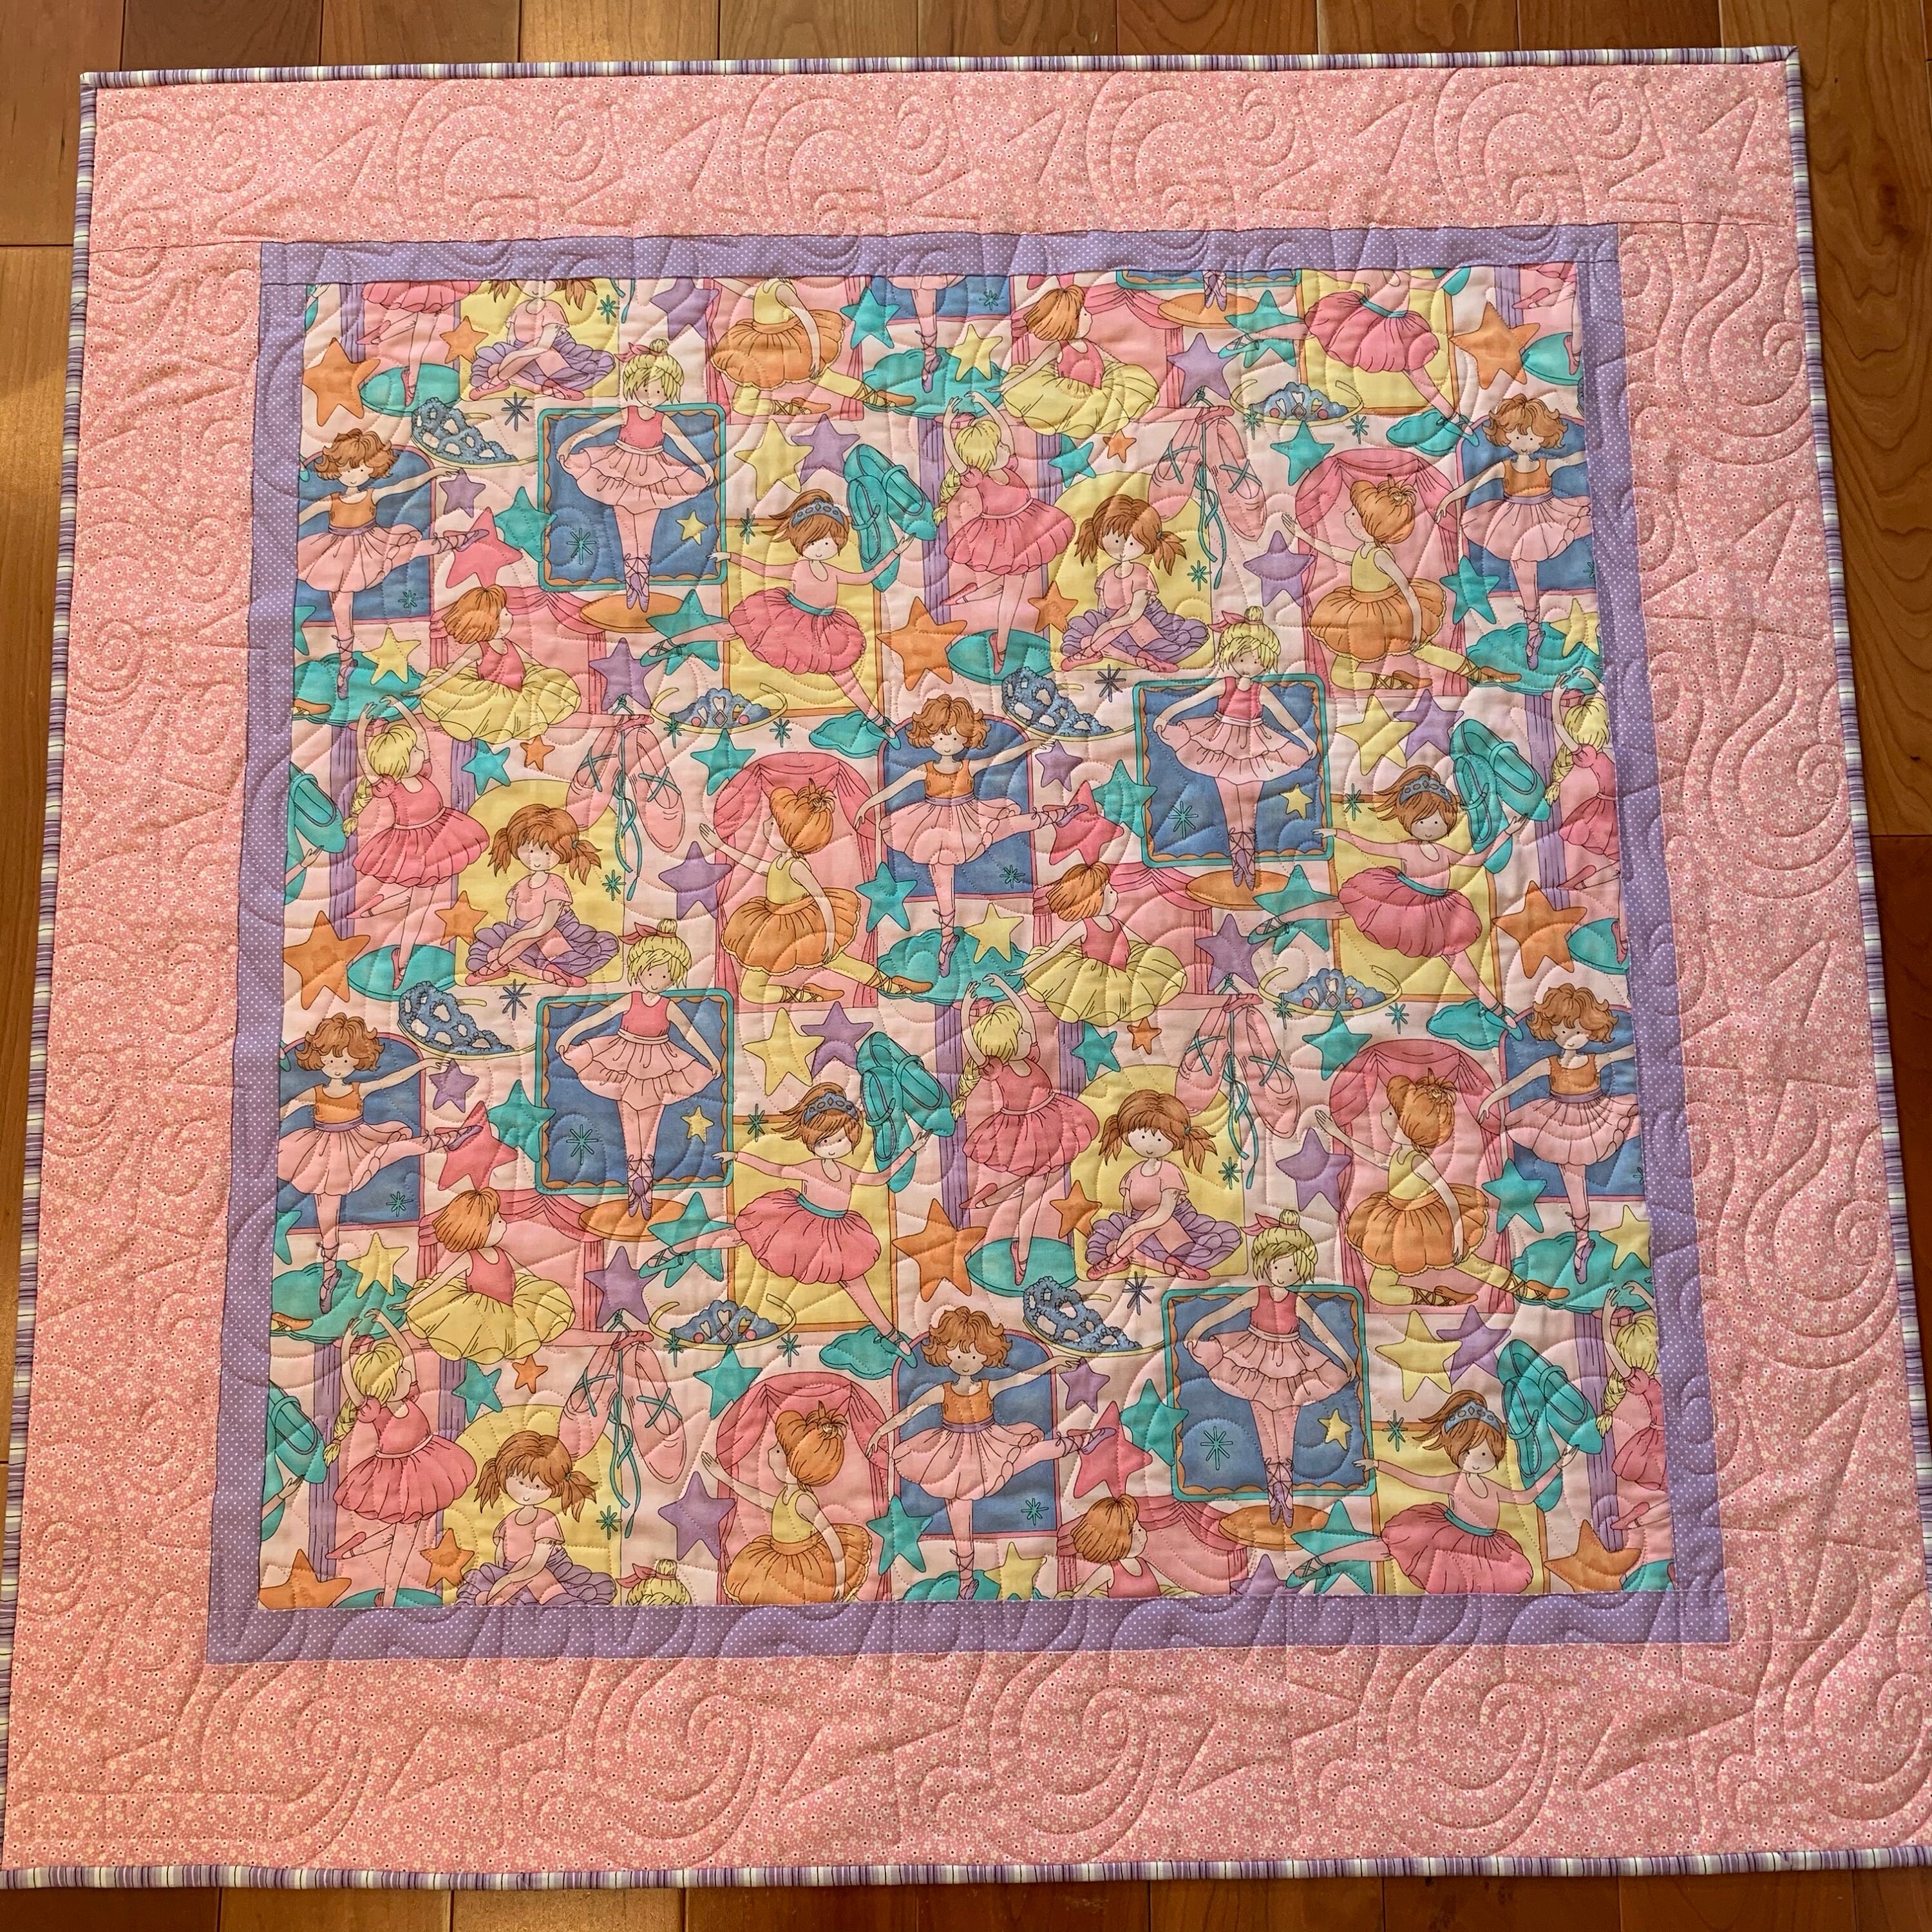 Ballet Dancers Quilt Handmade Quilt Pink and Purple Quilt One-of-a-Kind Quilt Ballerina Girl or Baby Quilt